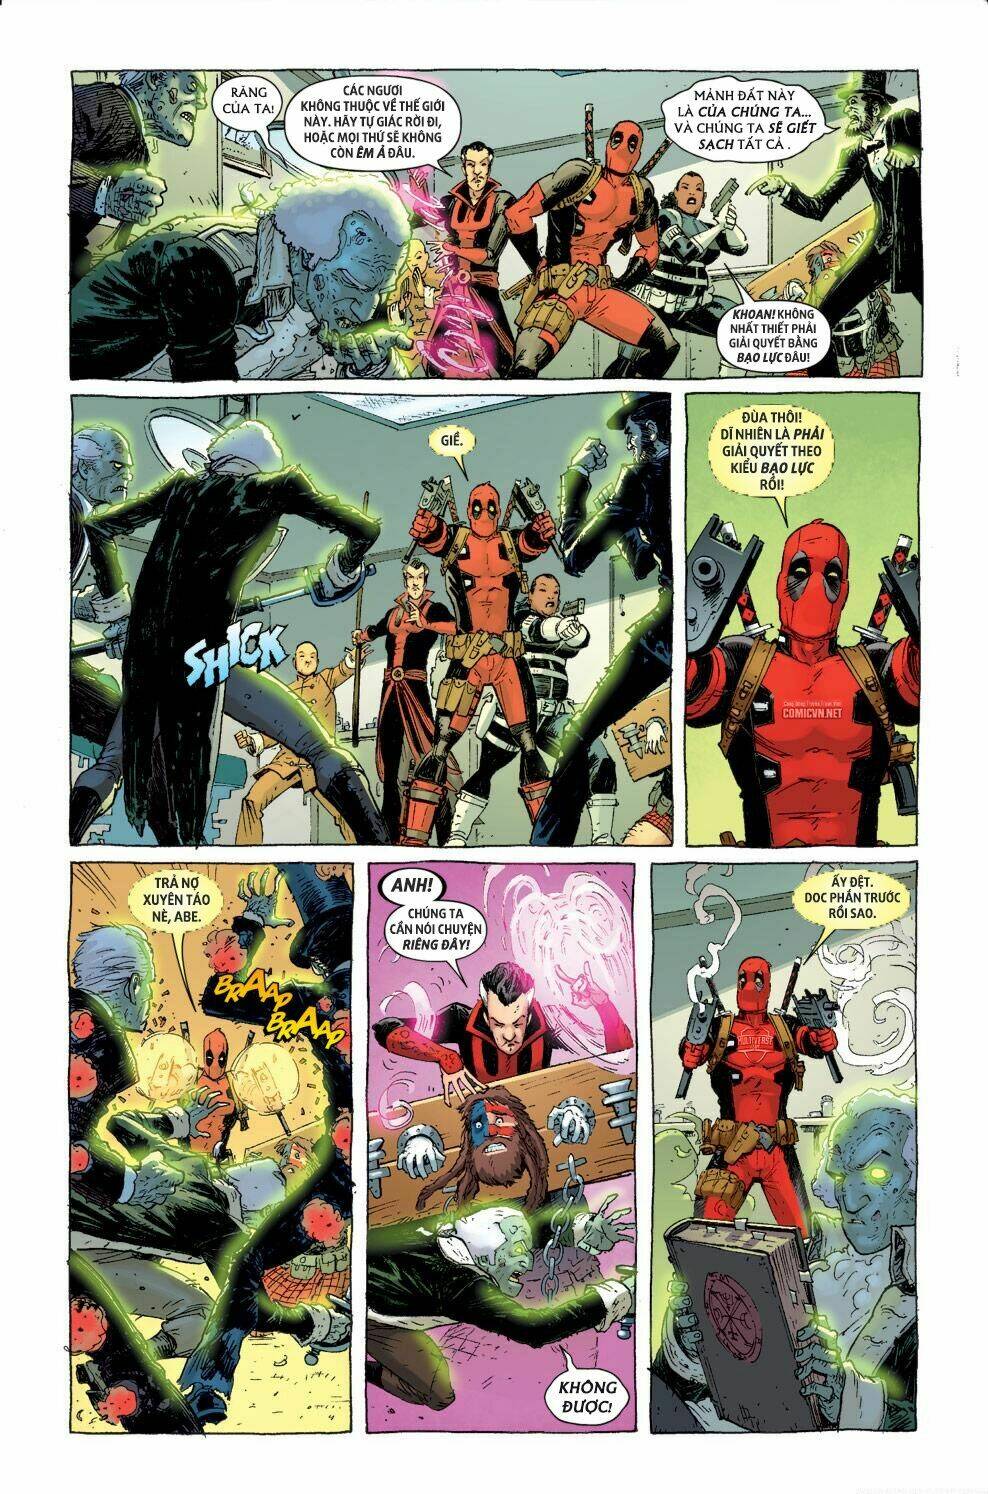 Deadpool 2012 Chapter 3: - We Fought A Zoo - Part 2 - Trang 8